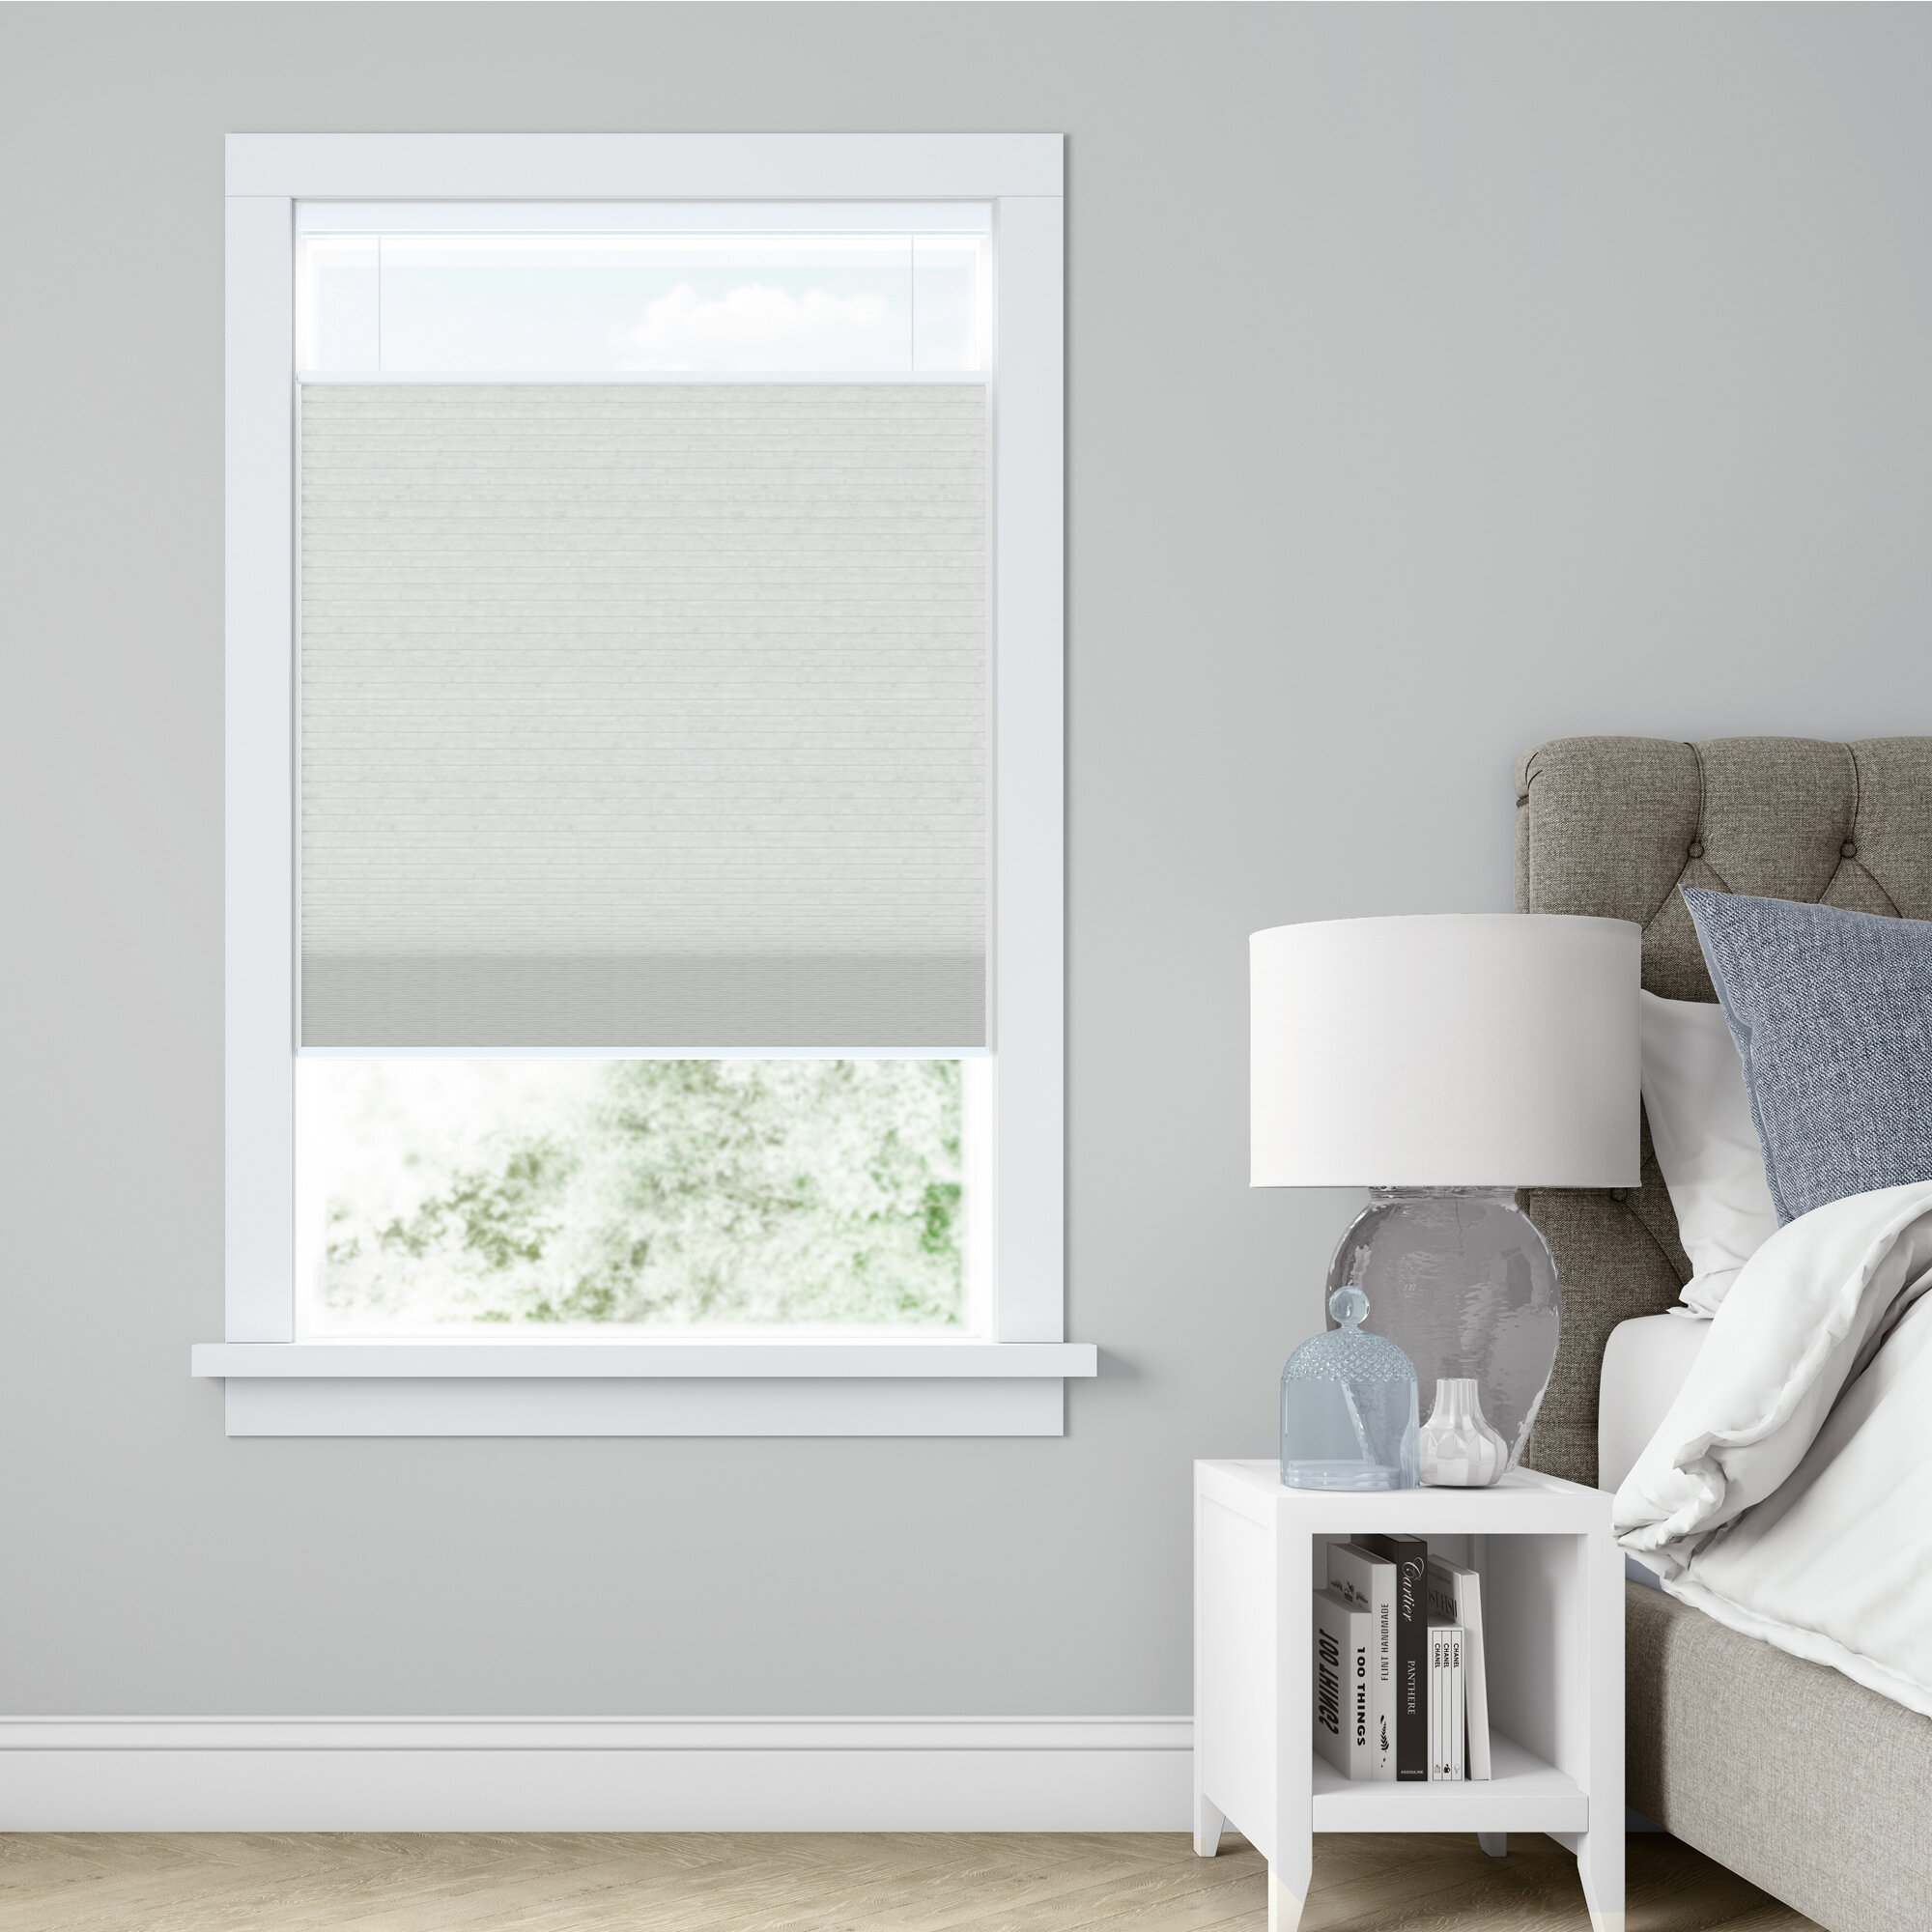 Frost White 16 1/2 W x 72 H MiLin Cordless Blackout Cellular Honeycomb Shades Top Down Bottom Up One Week Fast Delivery Bedroom Kitchen Window Blinds and Shades Custom Cut to Size